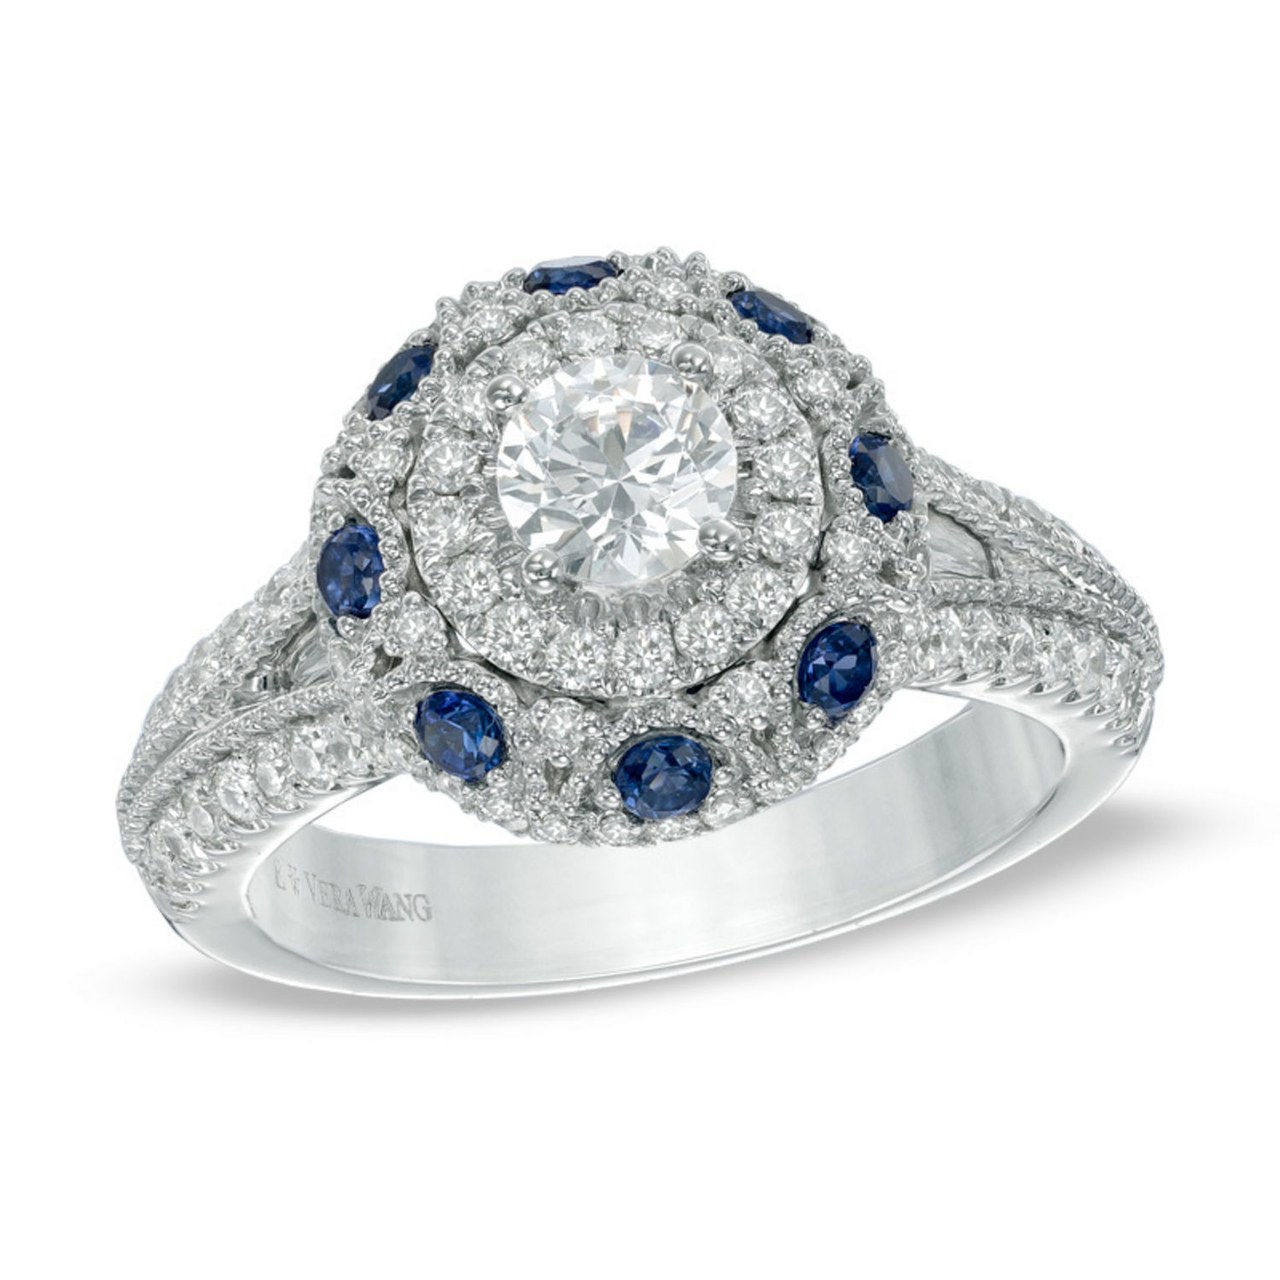 3a sapphire engagement rings 1026 courtesy vera wang love